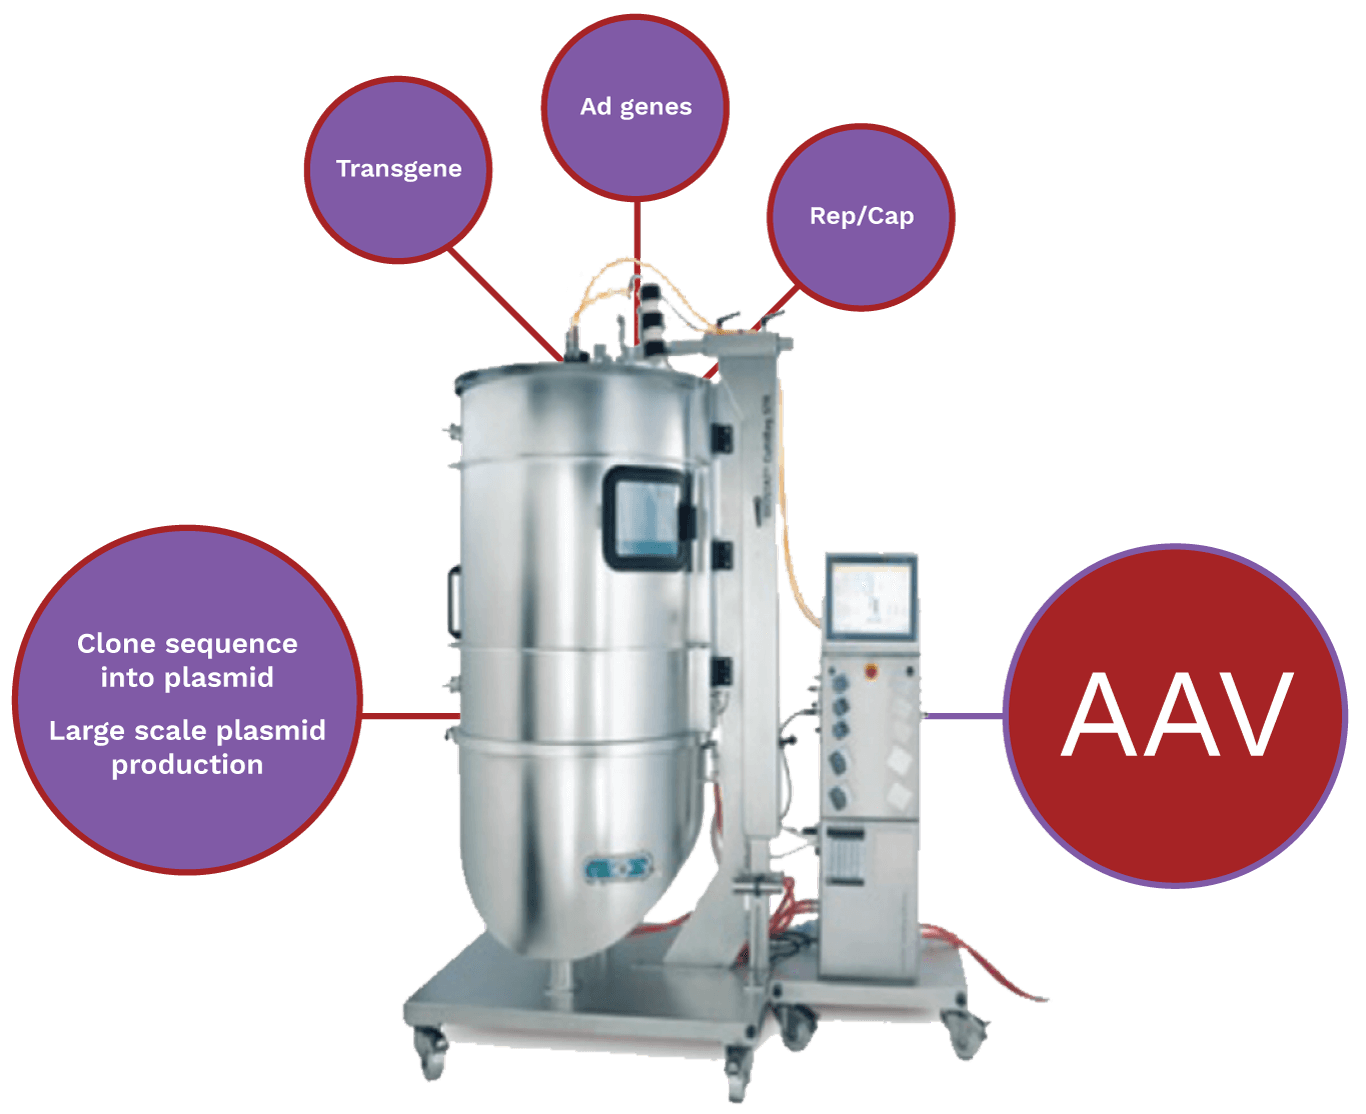 AAVPlatform proven end-to-end capability results in technology to increase scale and lower costs of goods as well as translate into clinic faster, safer and with greater predictability.